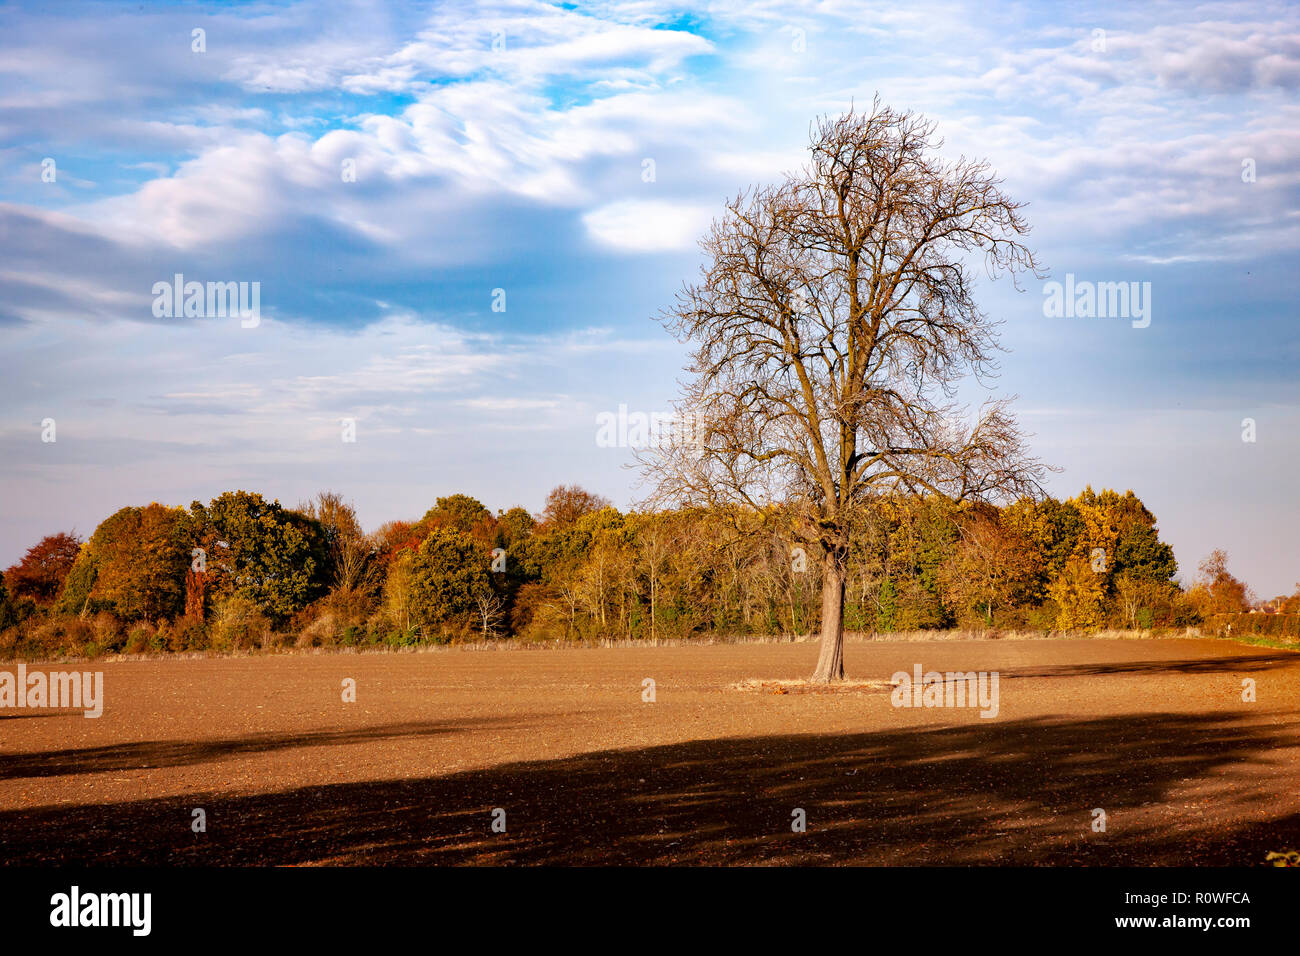 rural, county view, no people, no one, no persons, peaceful, Northamptonshire Countyside in Autumn Stock Photo